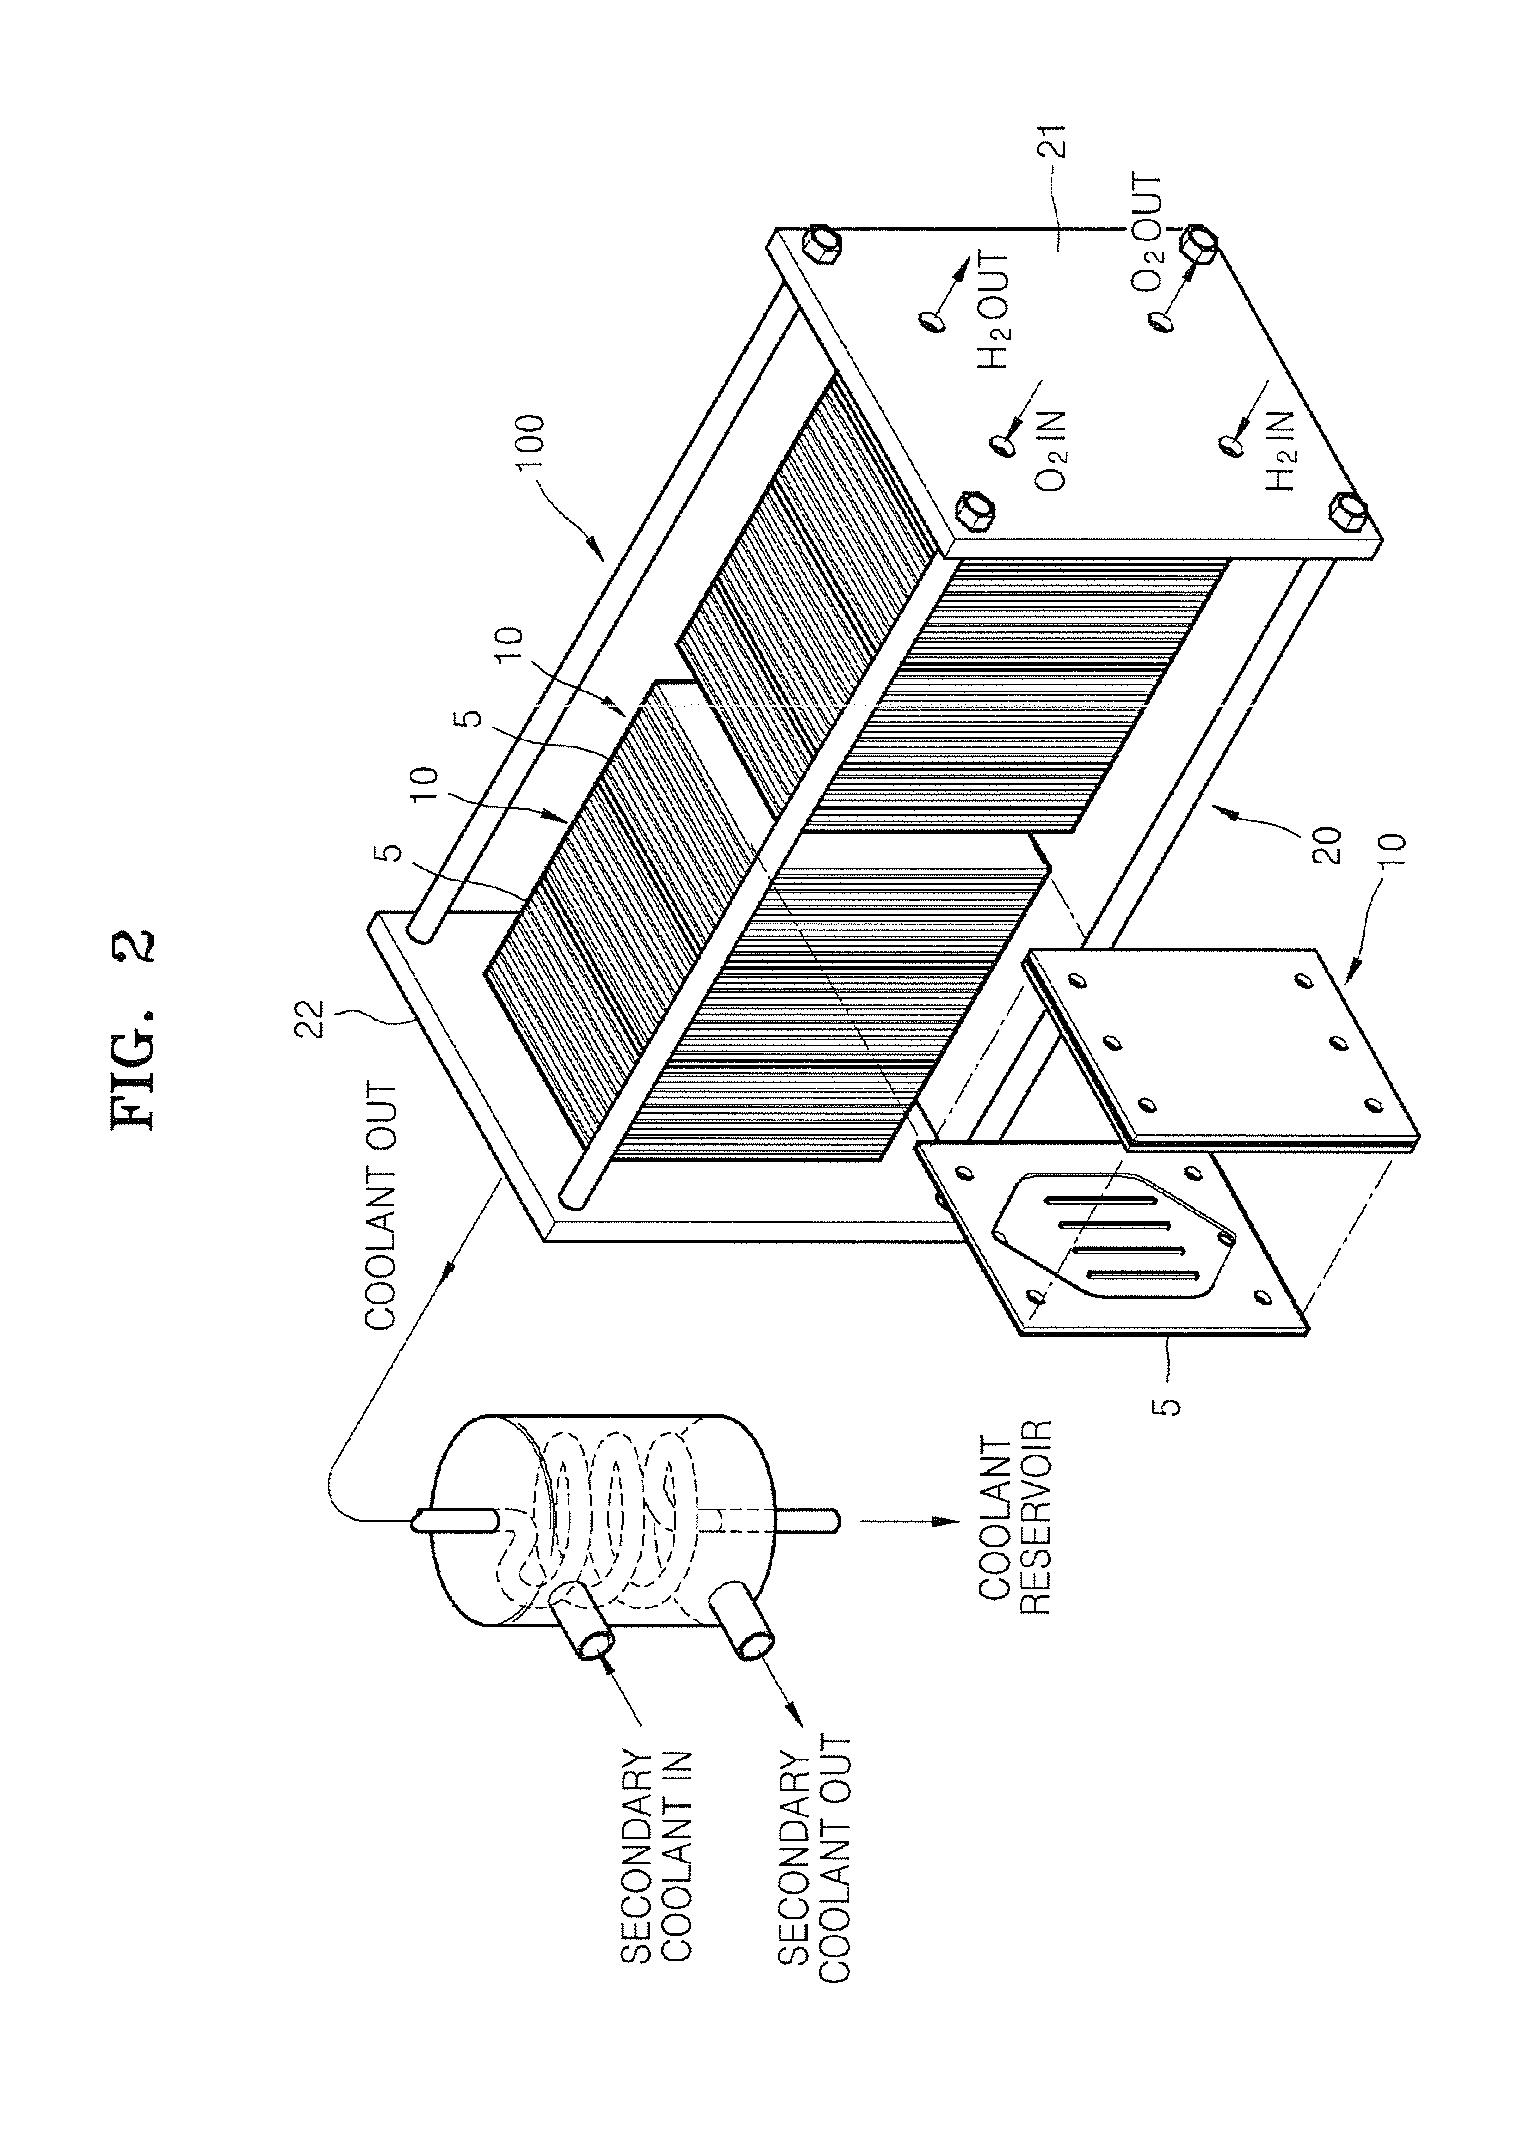 Method of starting fuel cell system